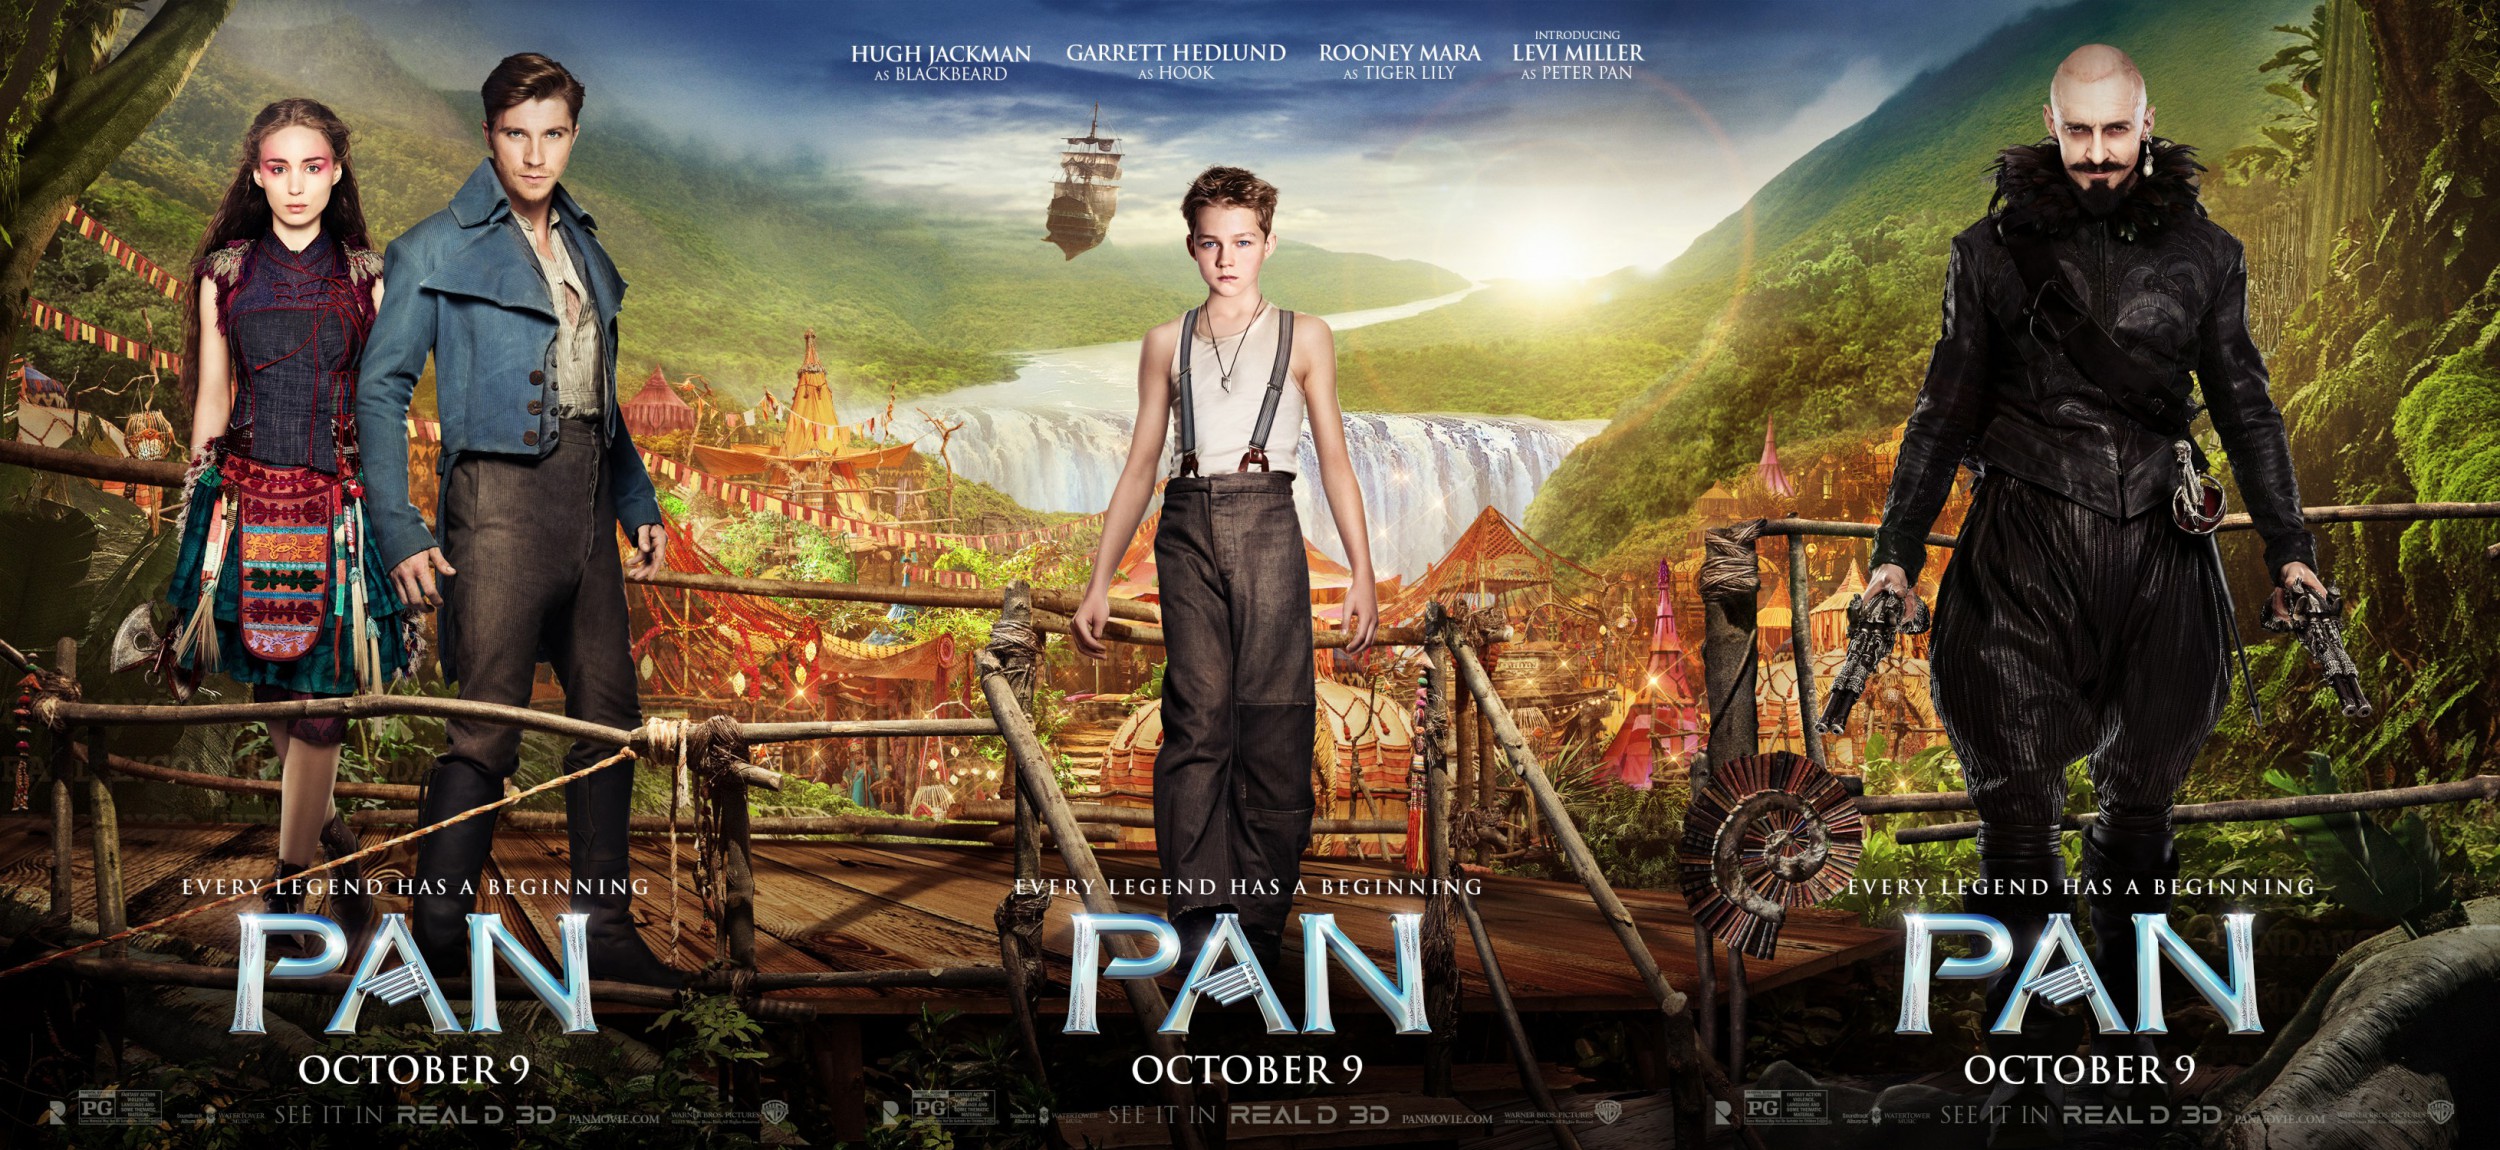 Mega Sized Movie Poster Image for Pan (#16 of 18)